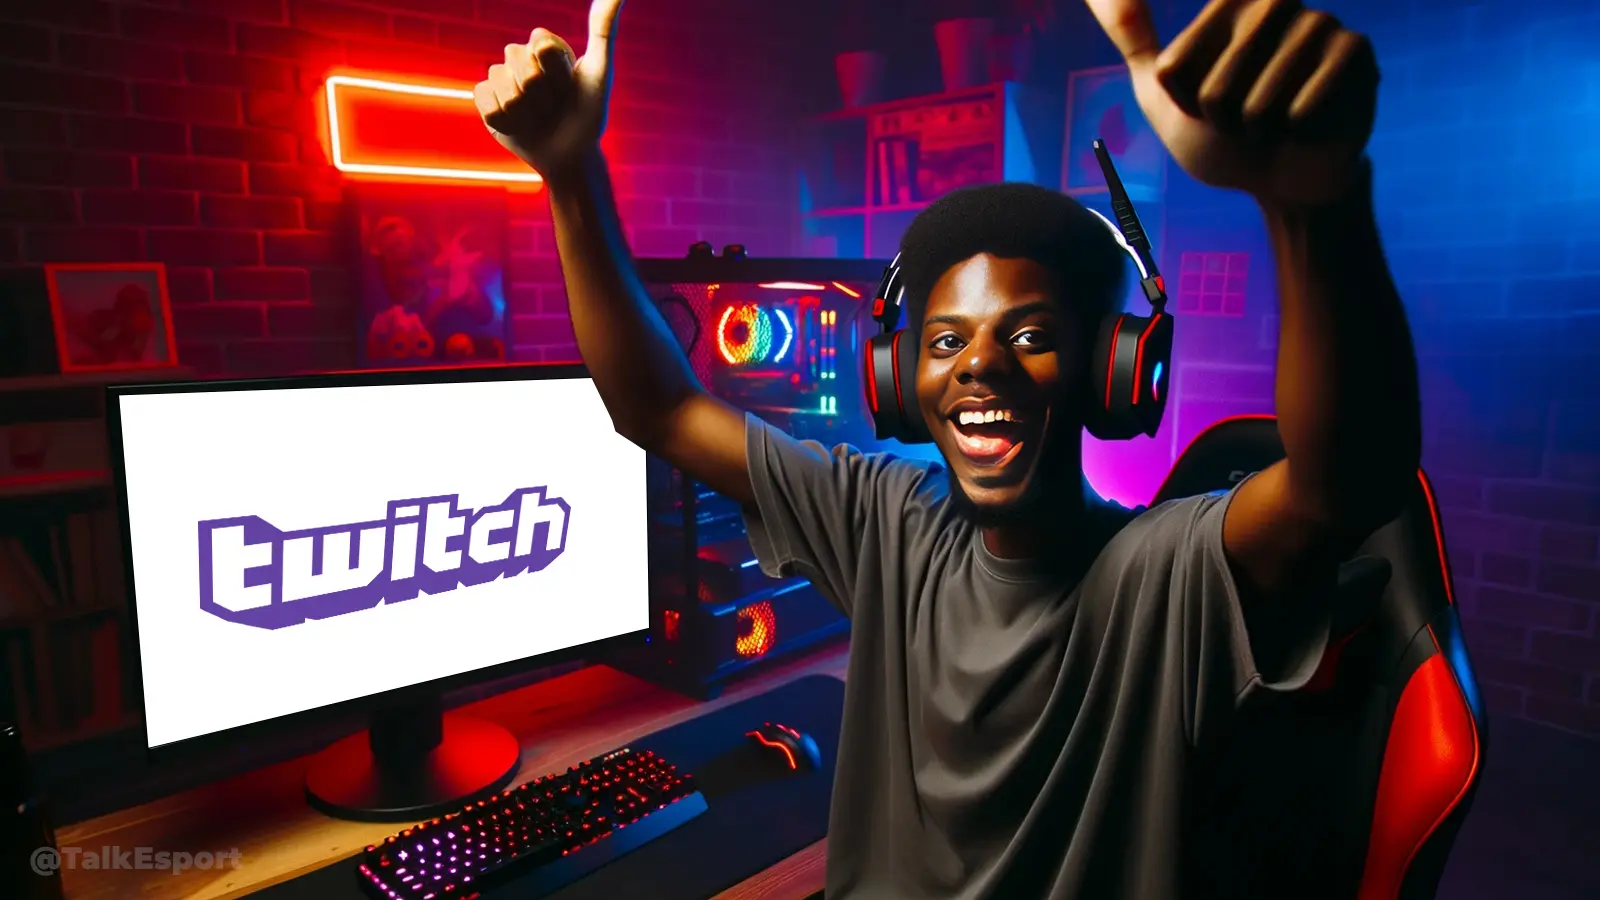 IShowSpeed makes triumphant return to twitch after years-long ban - The  Economic Times